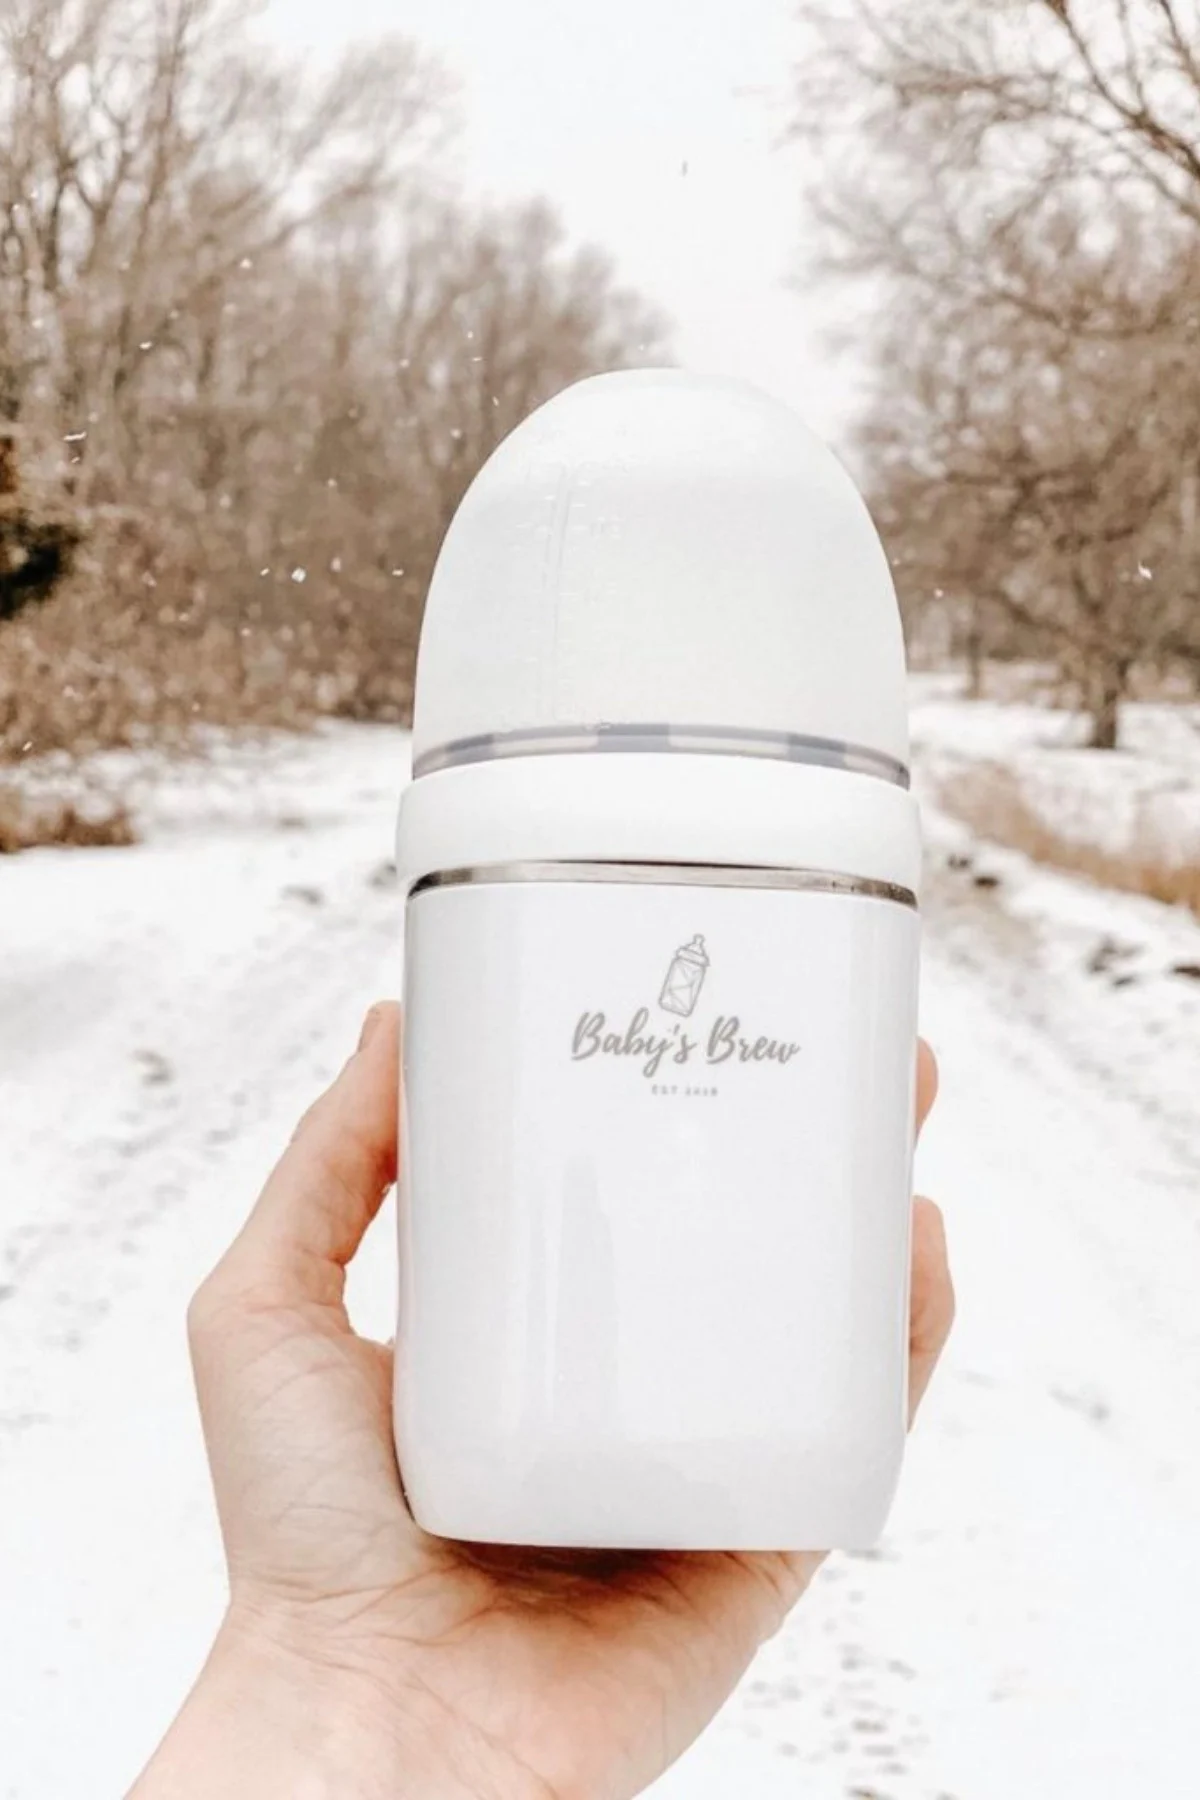 Woman holds up Baby's Brew baby bottle warmer in front of snowy, tree-lined road.